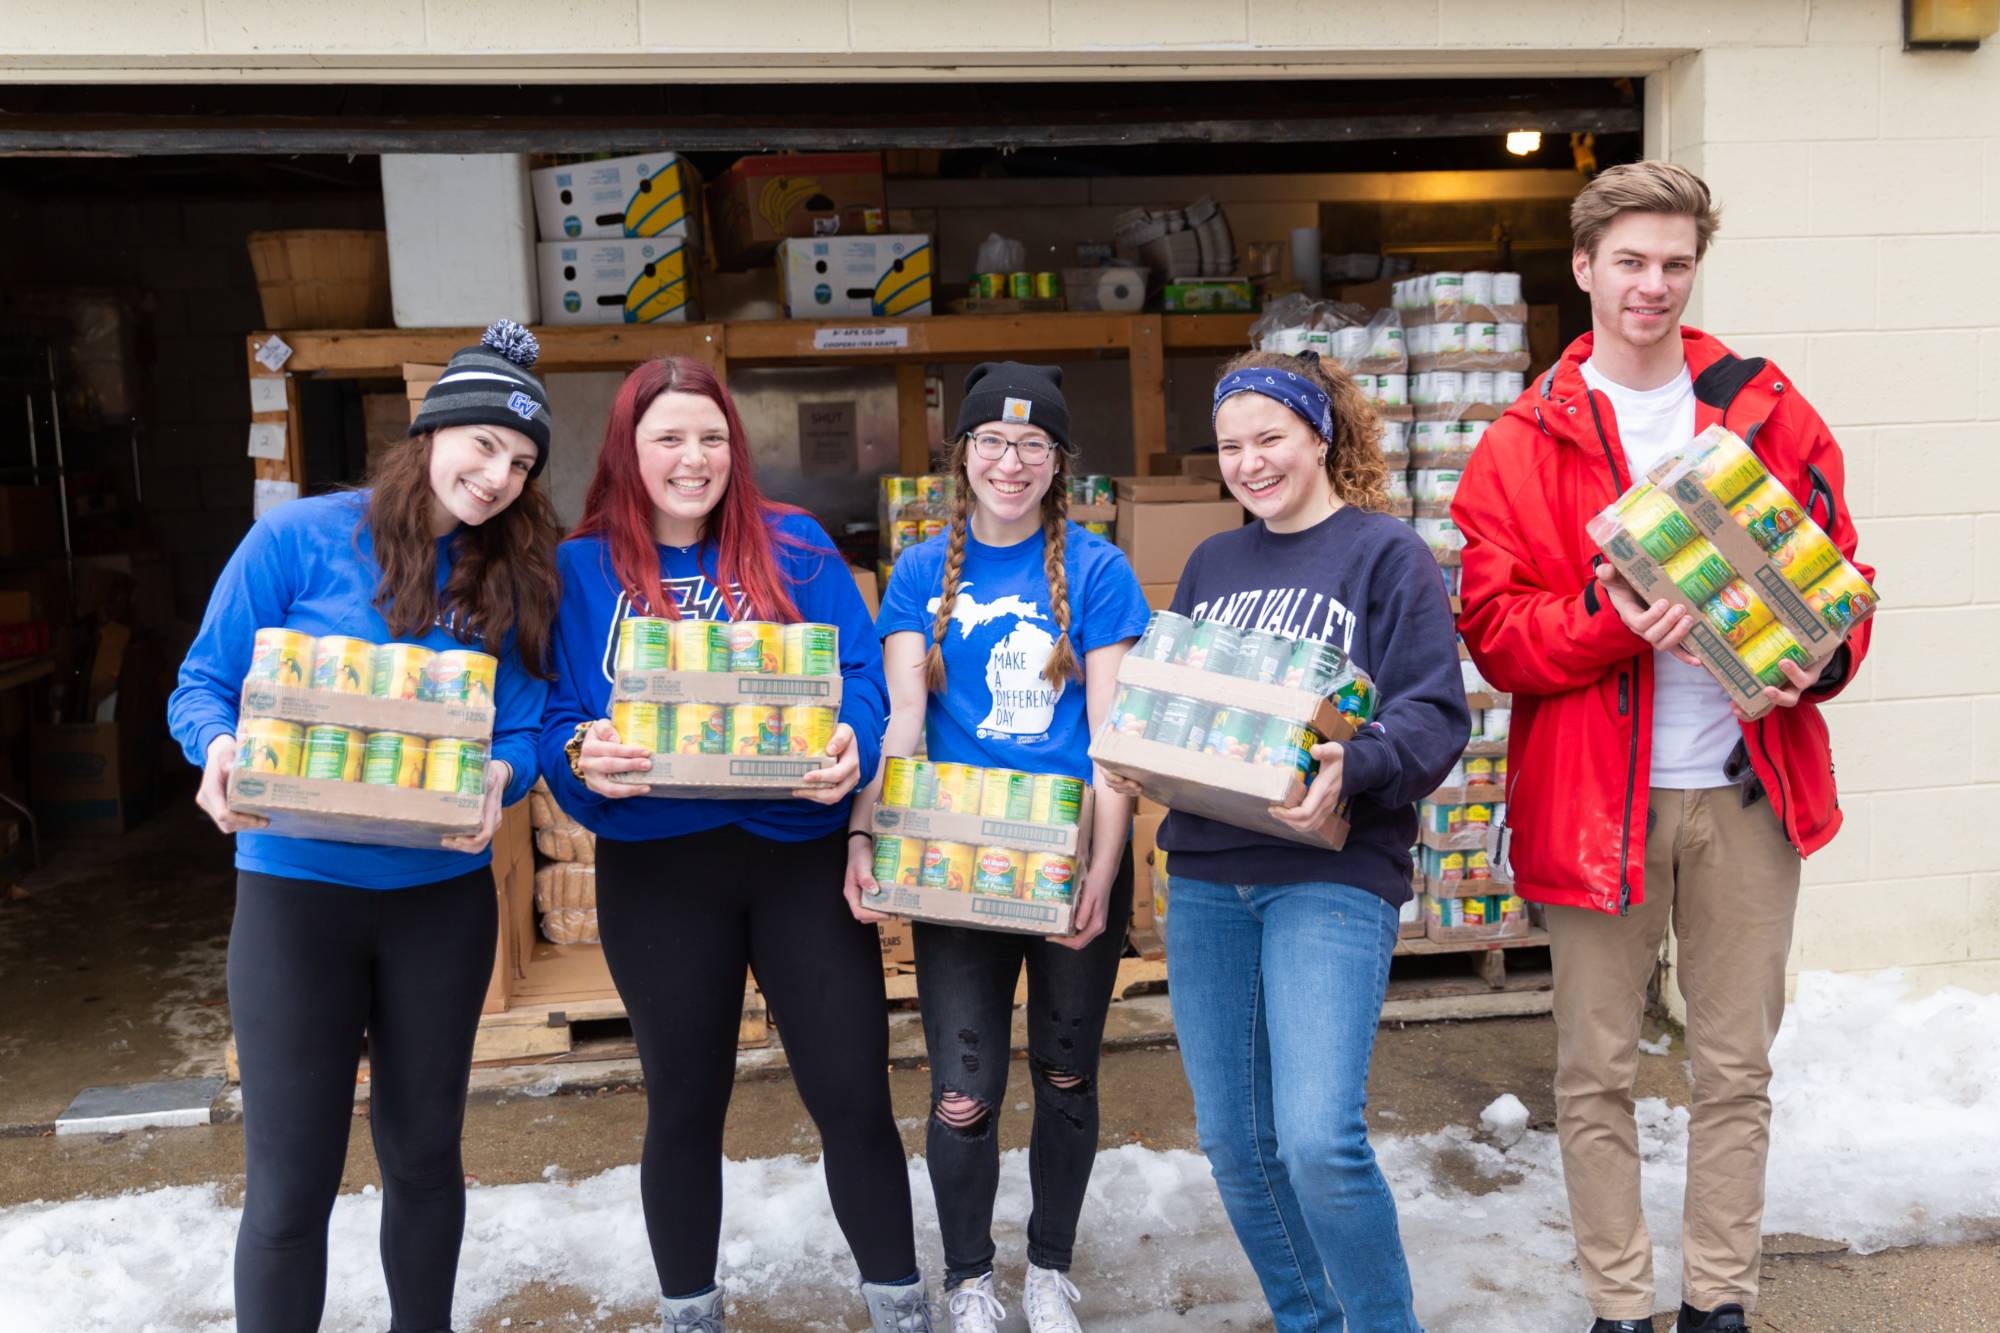 Students smiling for the camera and holding canned goods and assorted food items